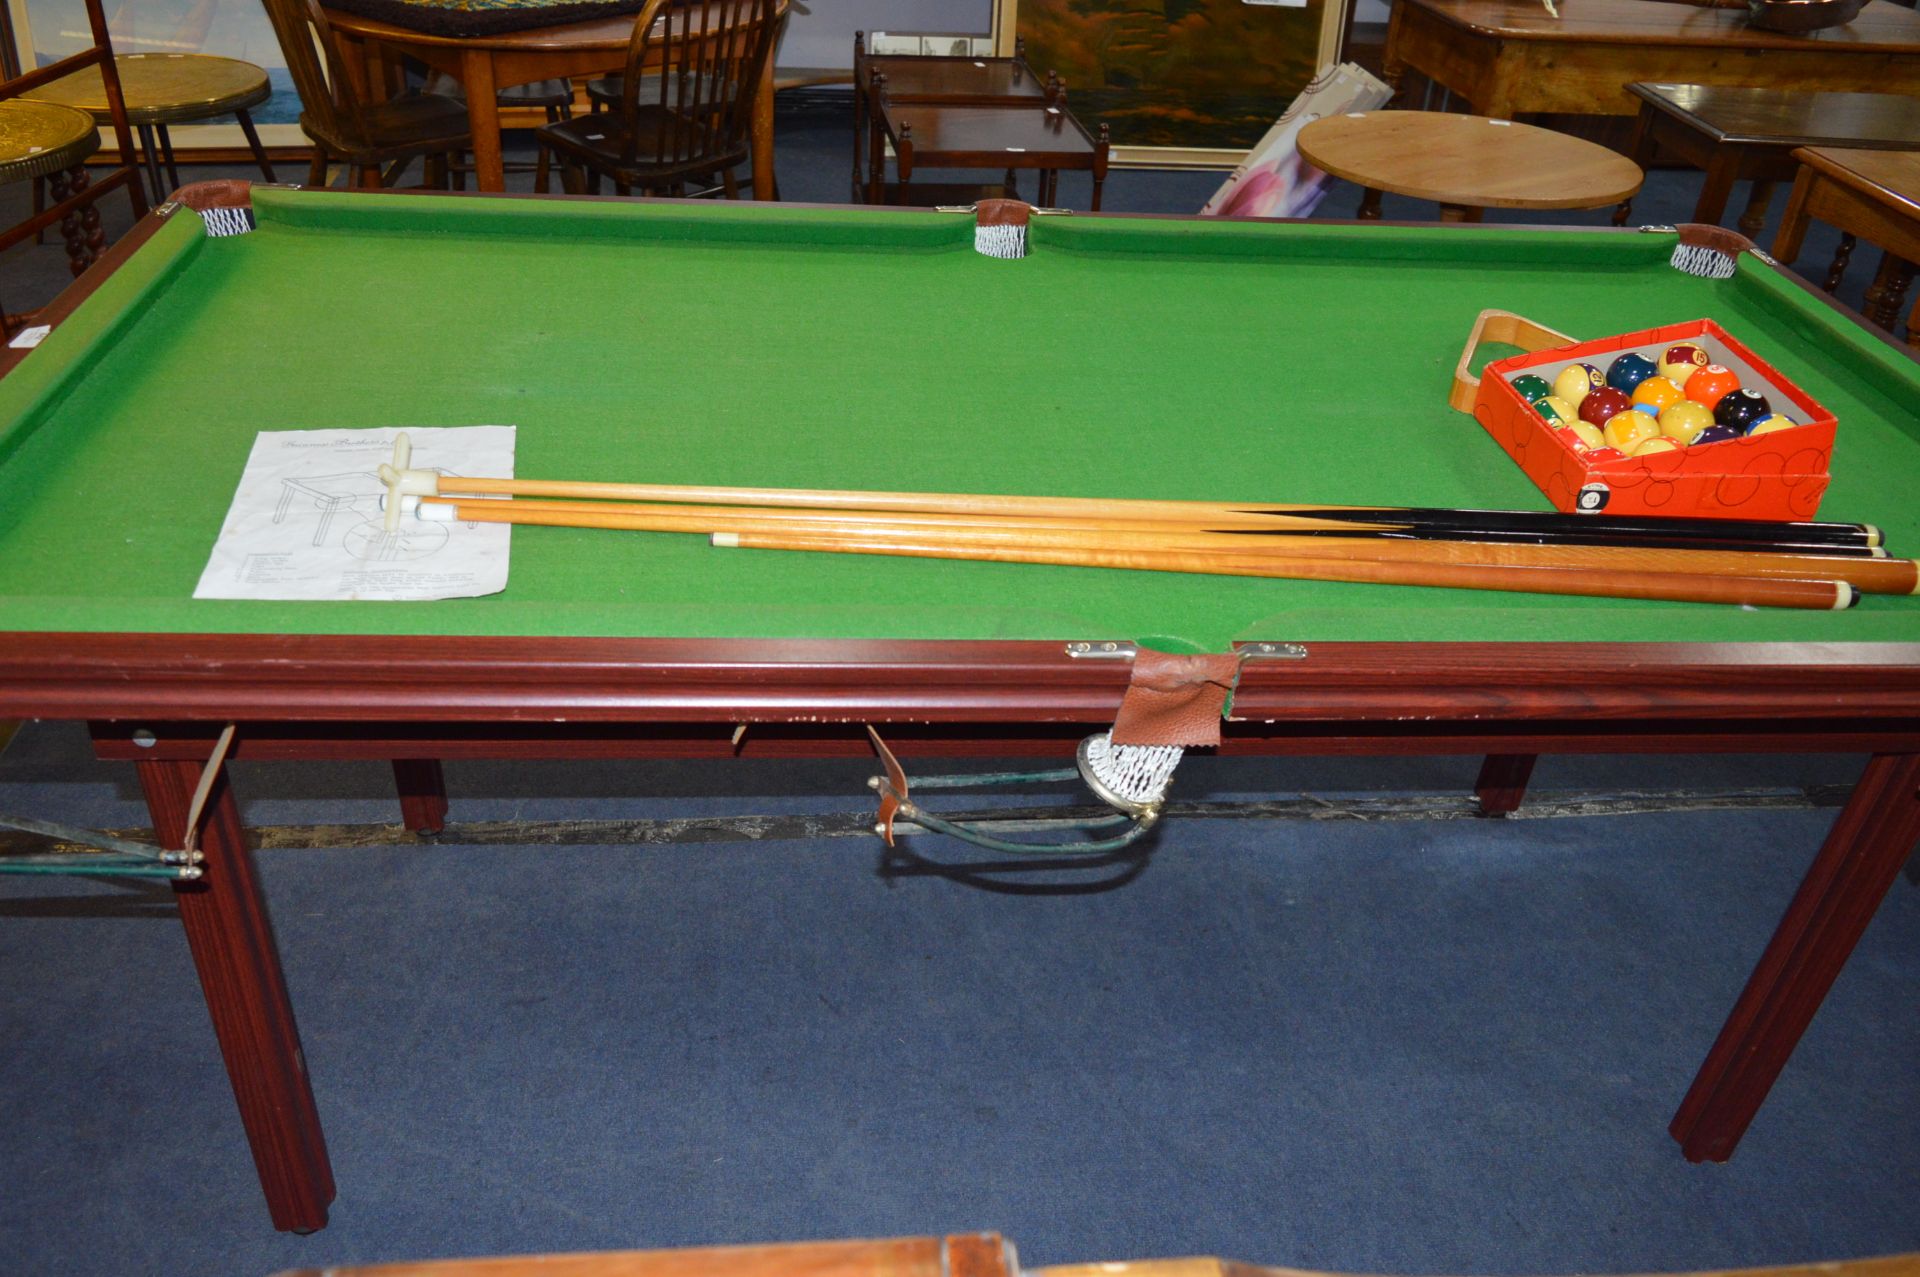 6' Snooker Table with Cues, Balls and Triangle